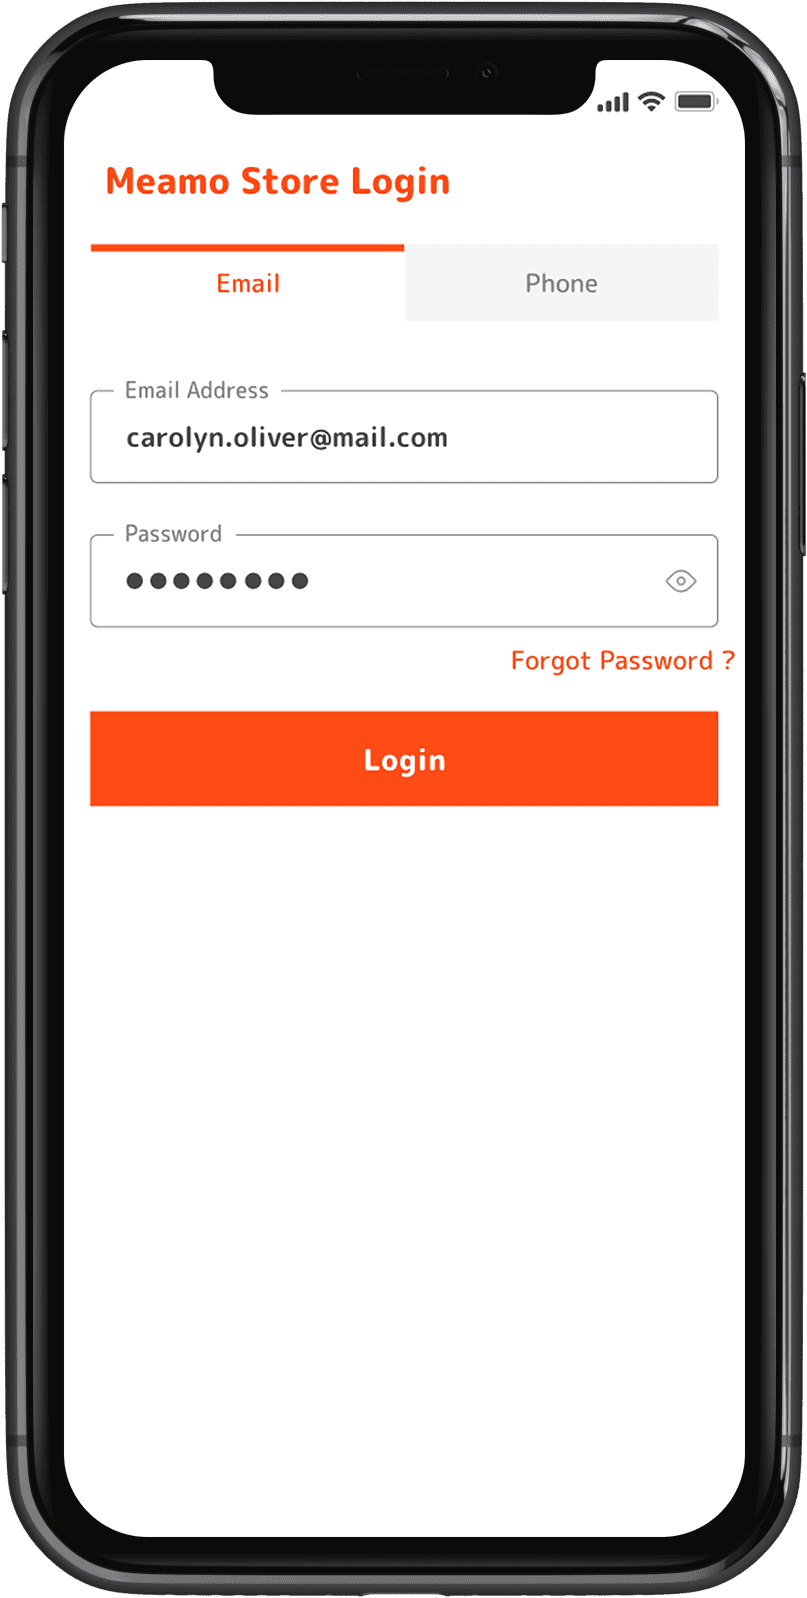 login-option-in-meat-delivery-picker-app.png